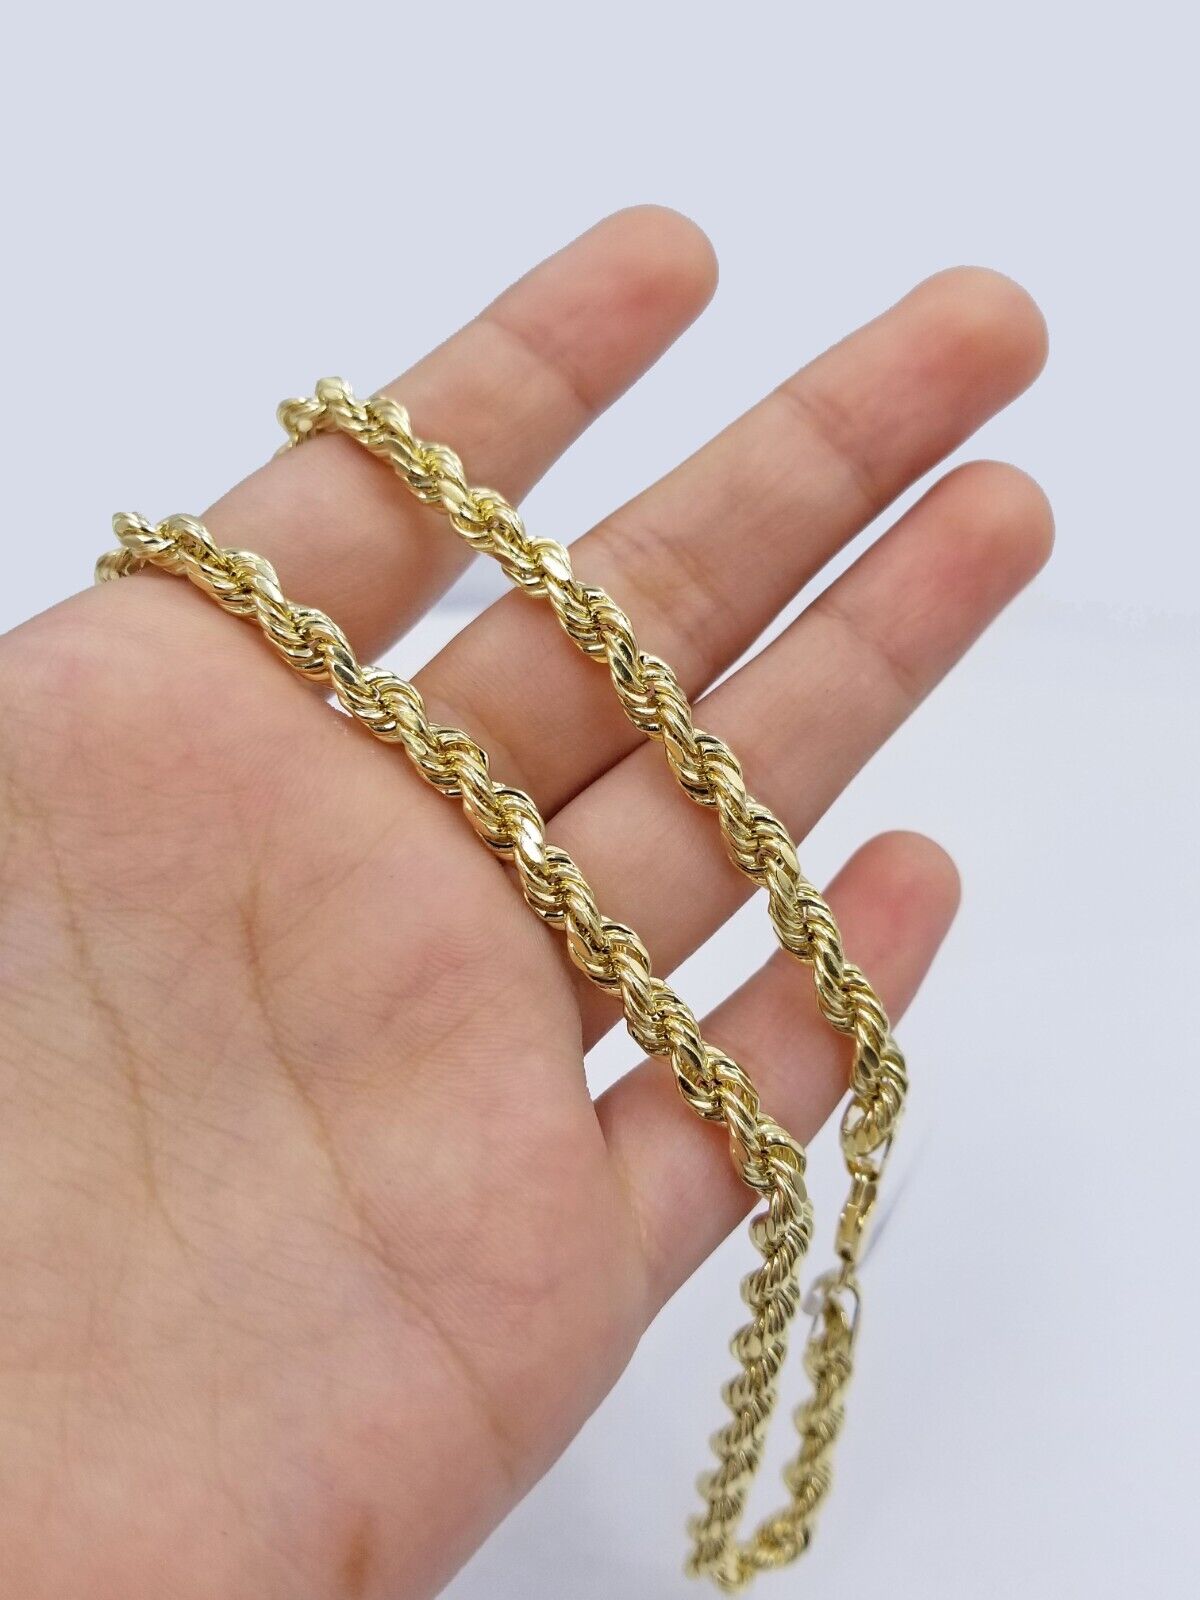 Real 14K Yellow Gold Rope Chain 5mm 22 Necklace